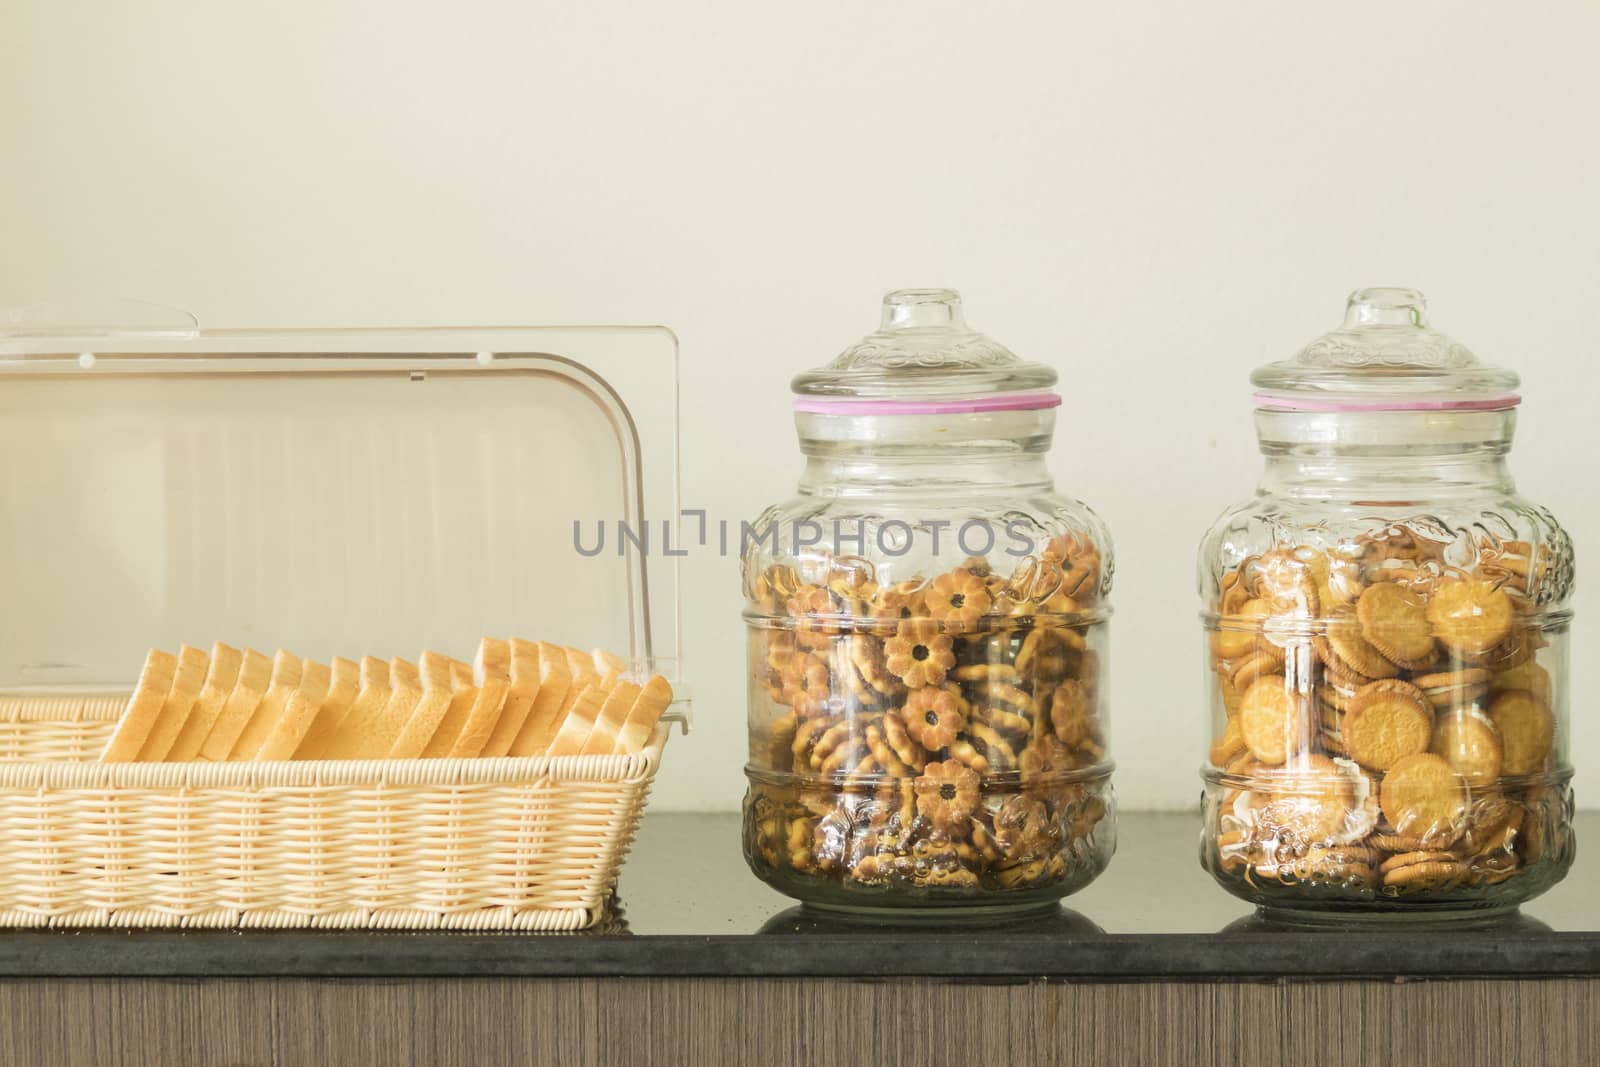 Bread in basket and Cookies and biscuits in glass jars  by Gobba17